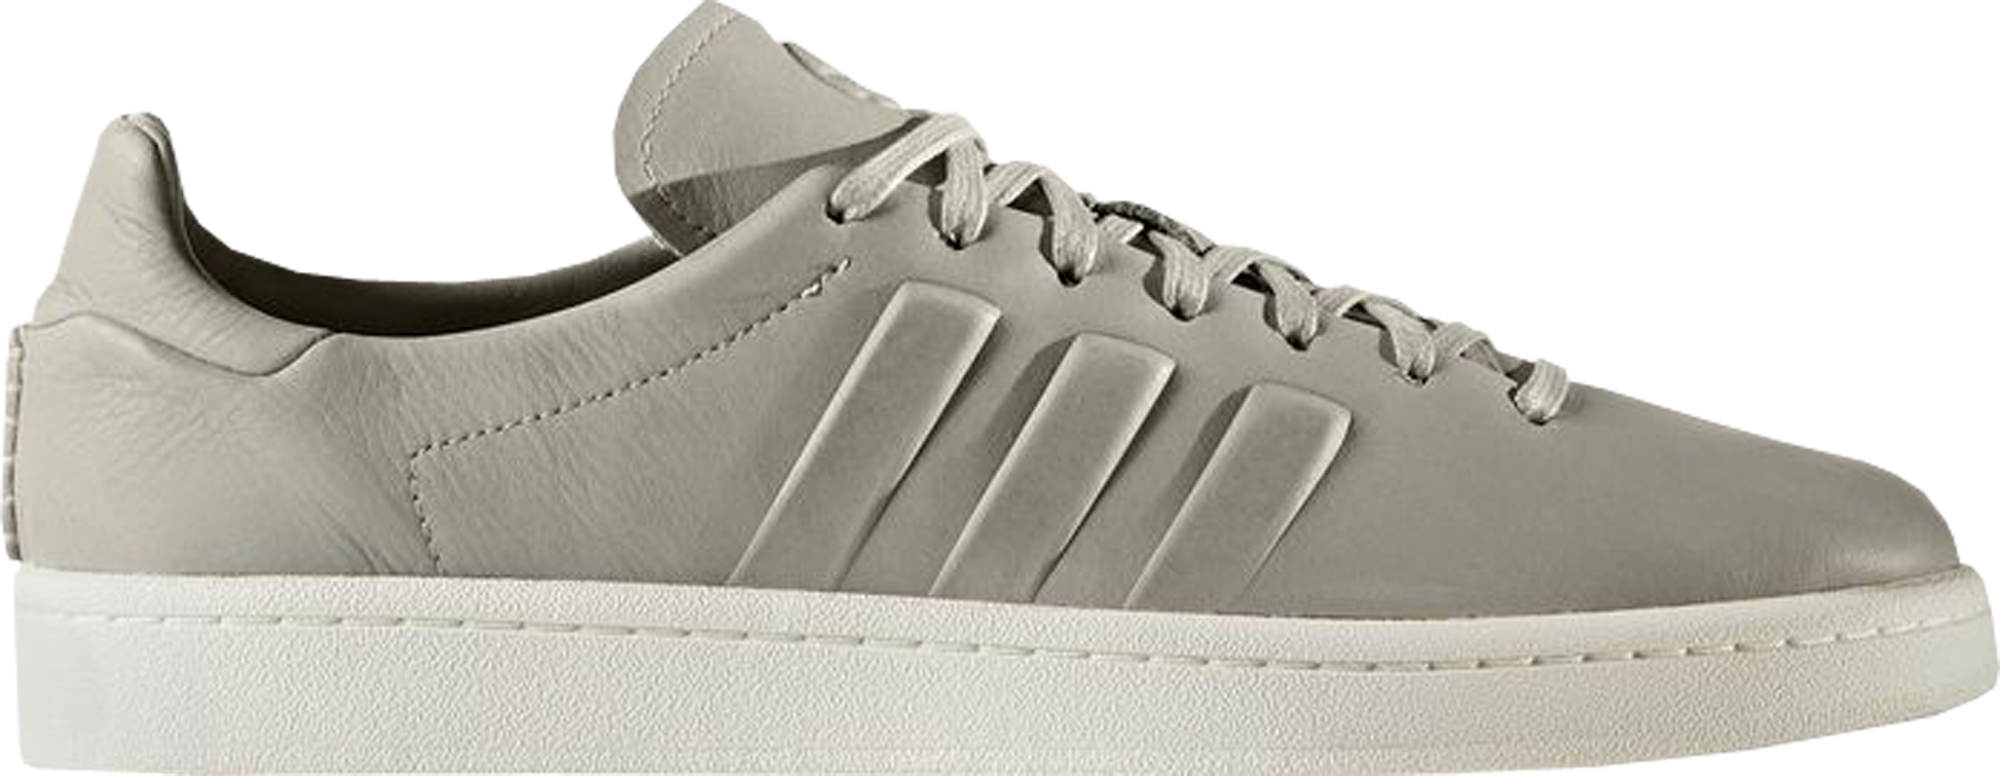 adidas wings and horns campus review